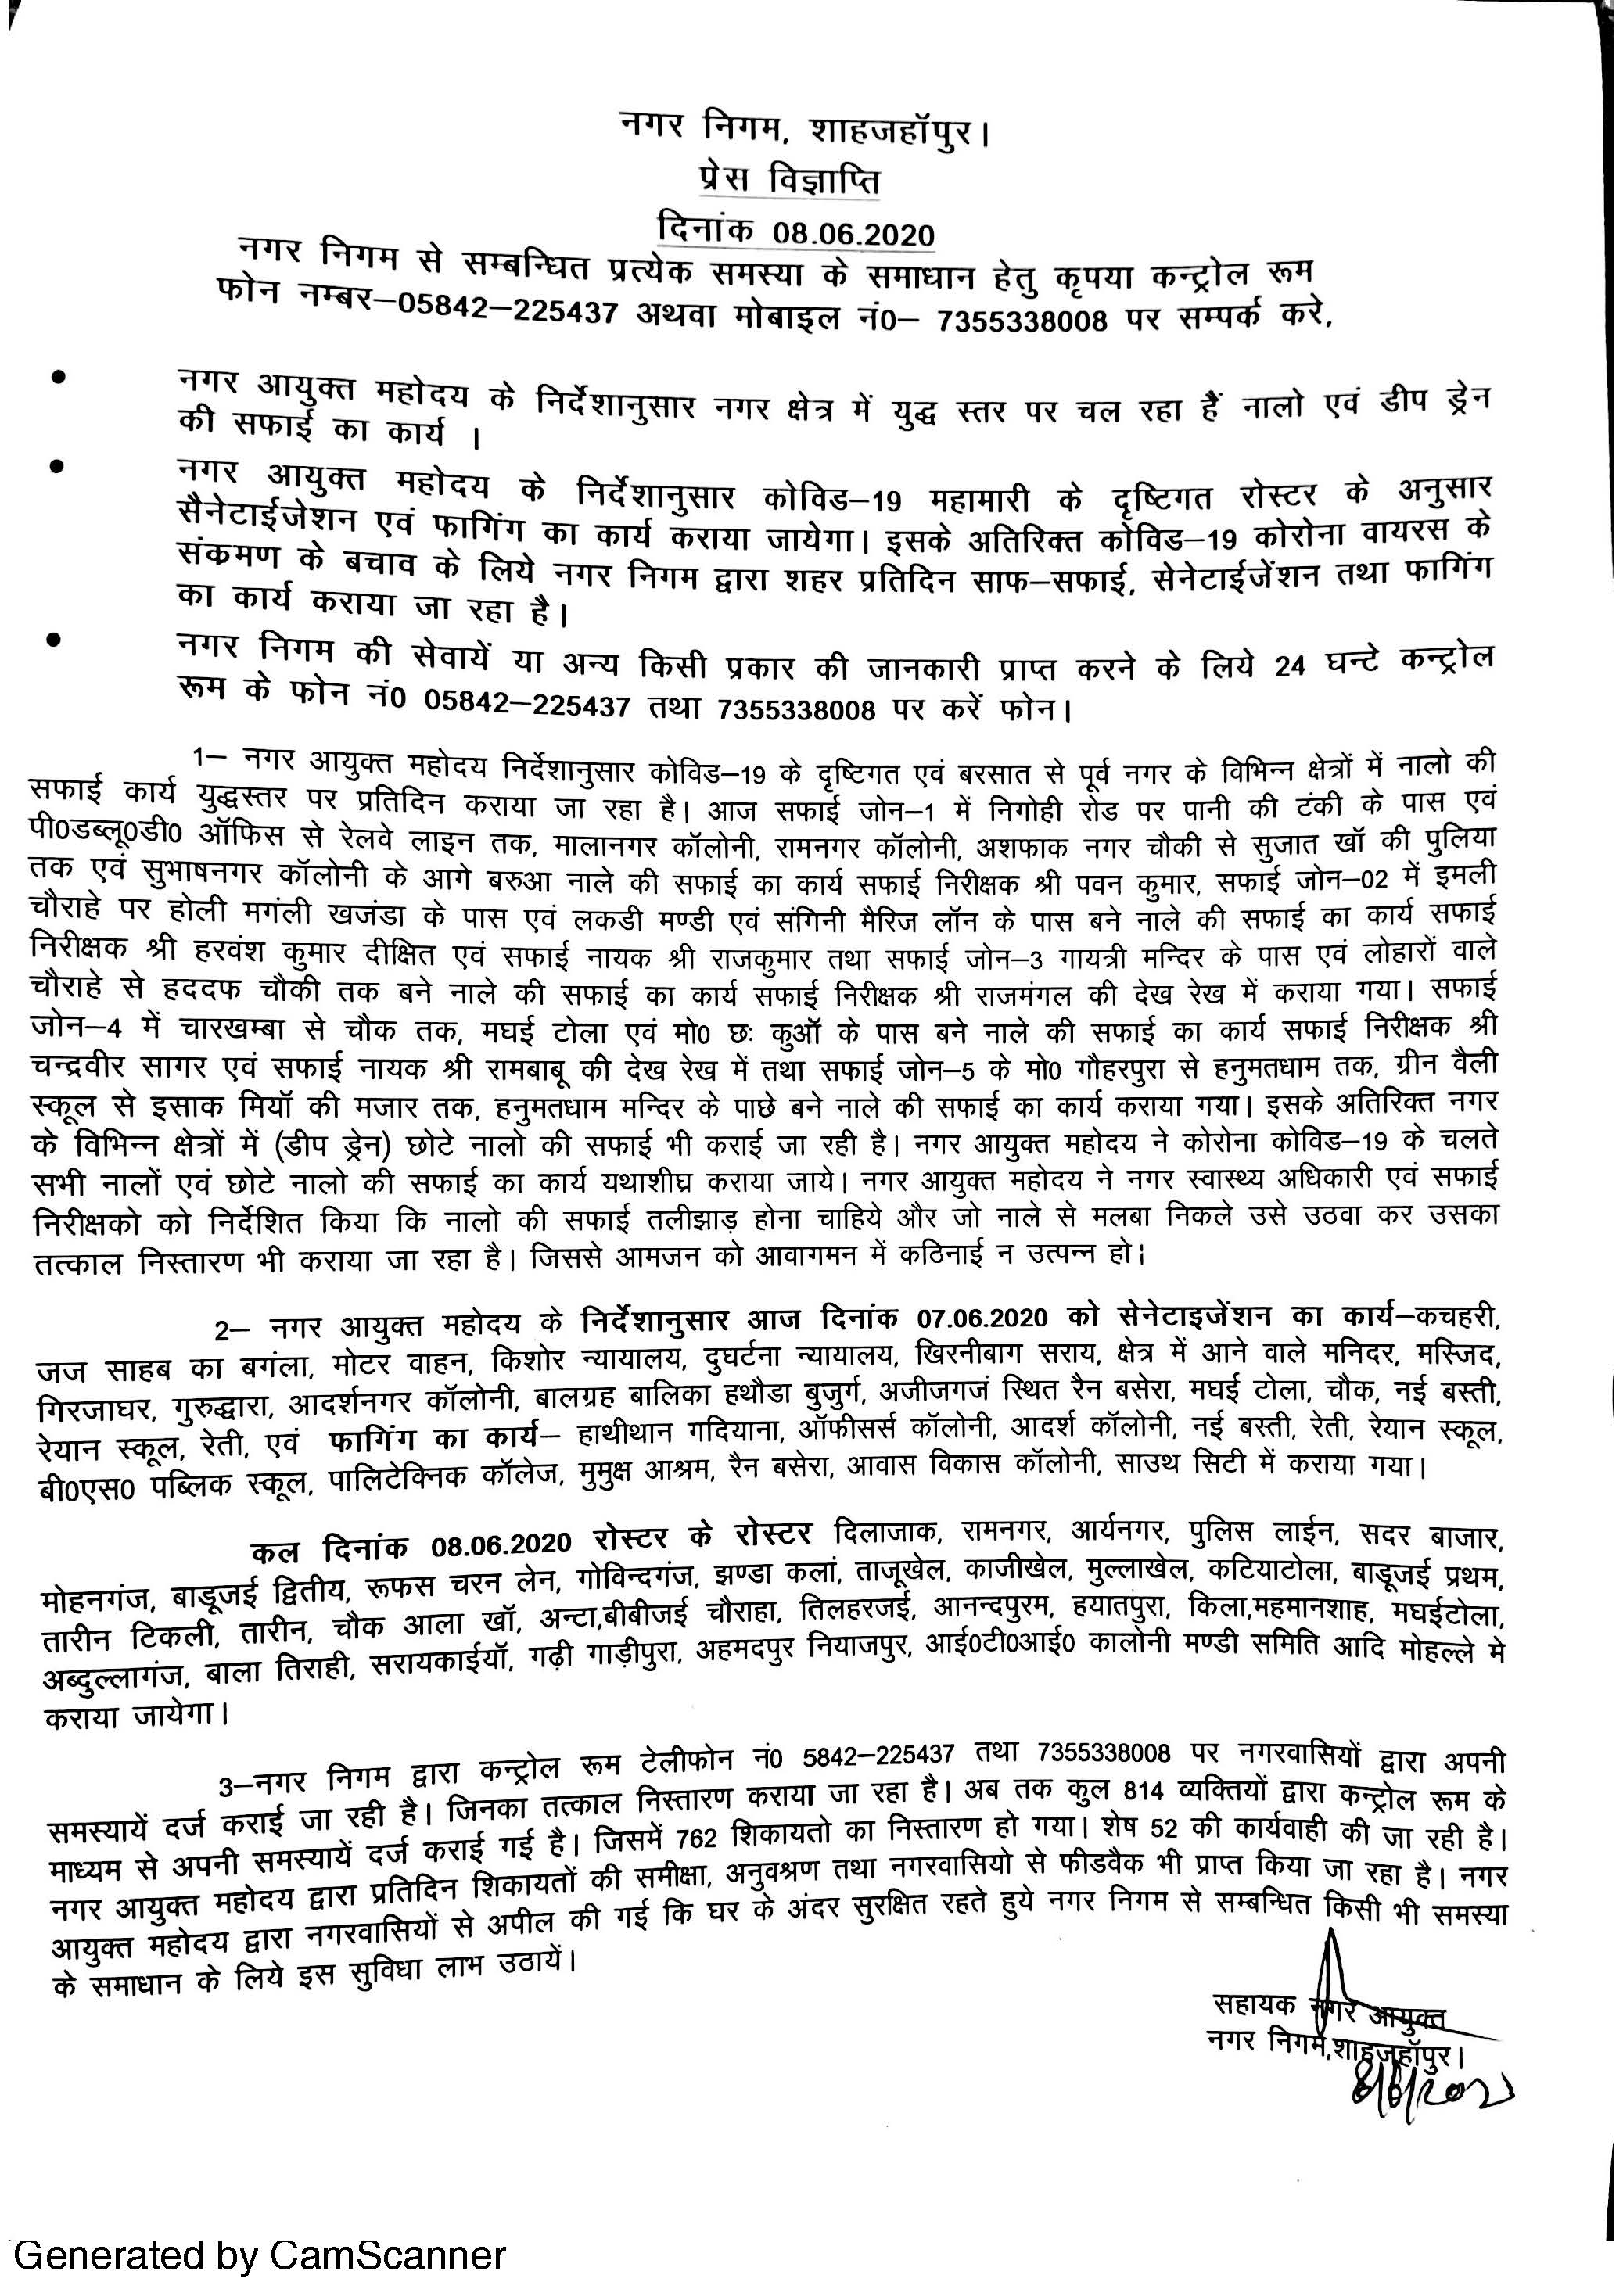 Regarding cleaning work of various drain located in the city on 08/06/2020 in view of COVID-19